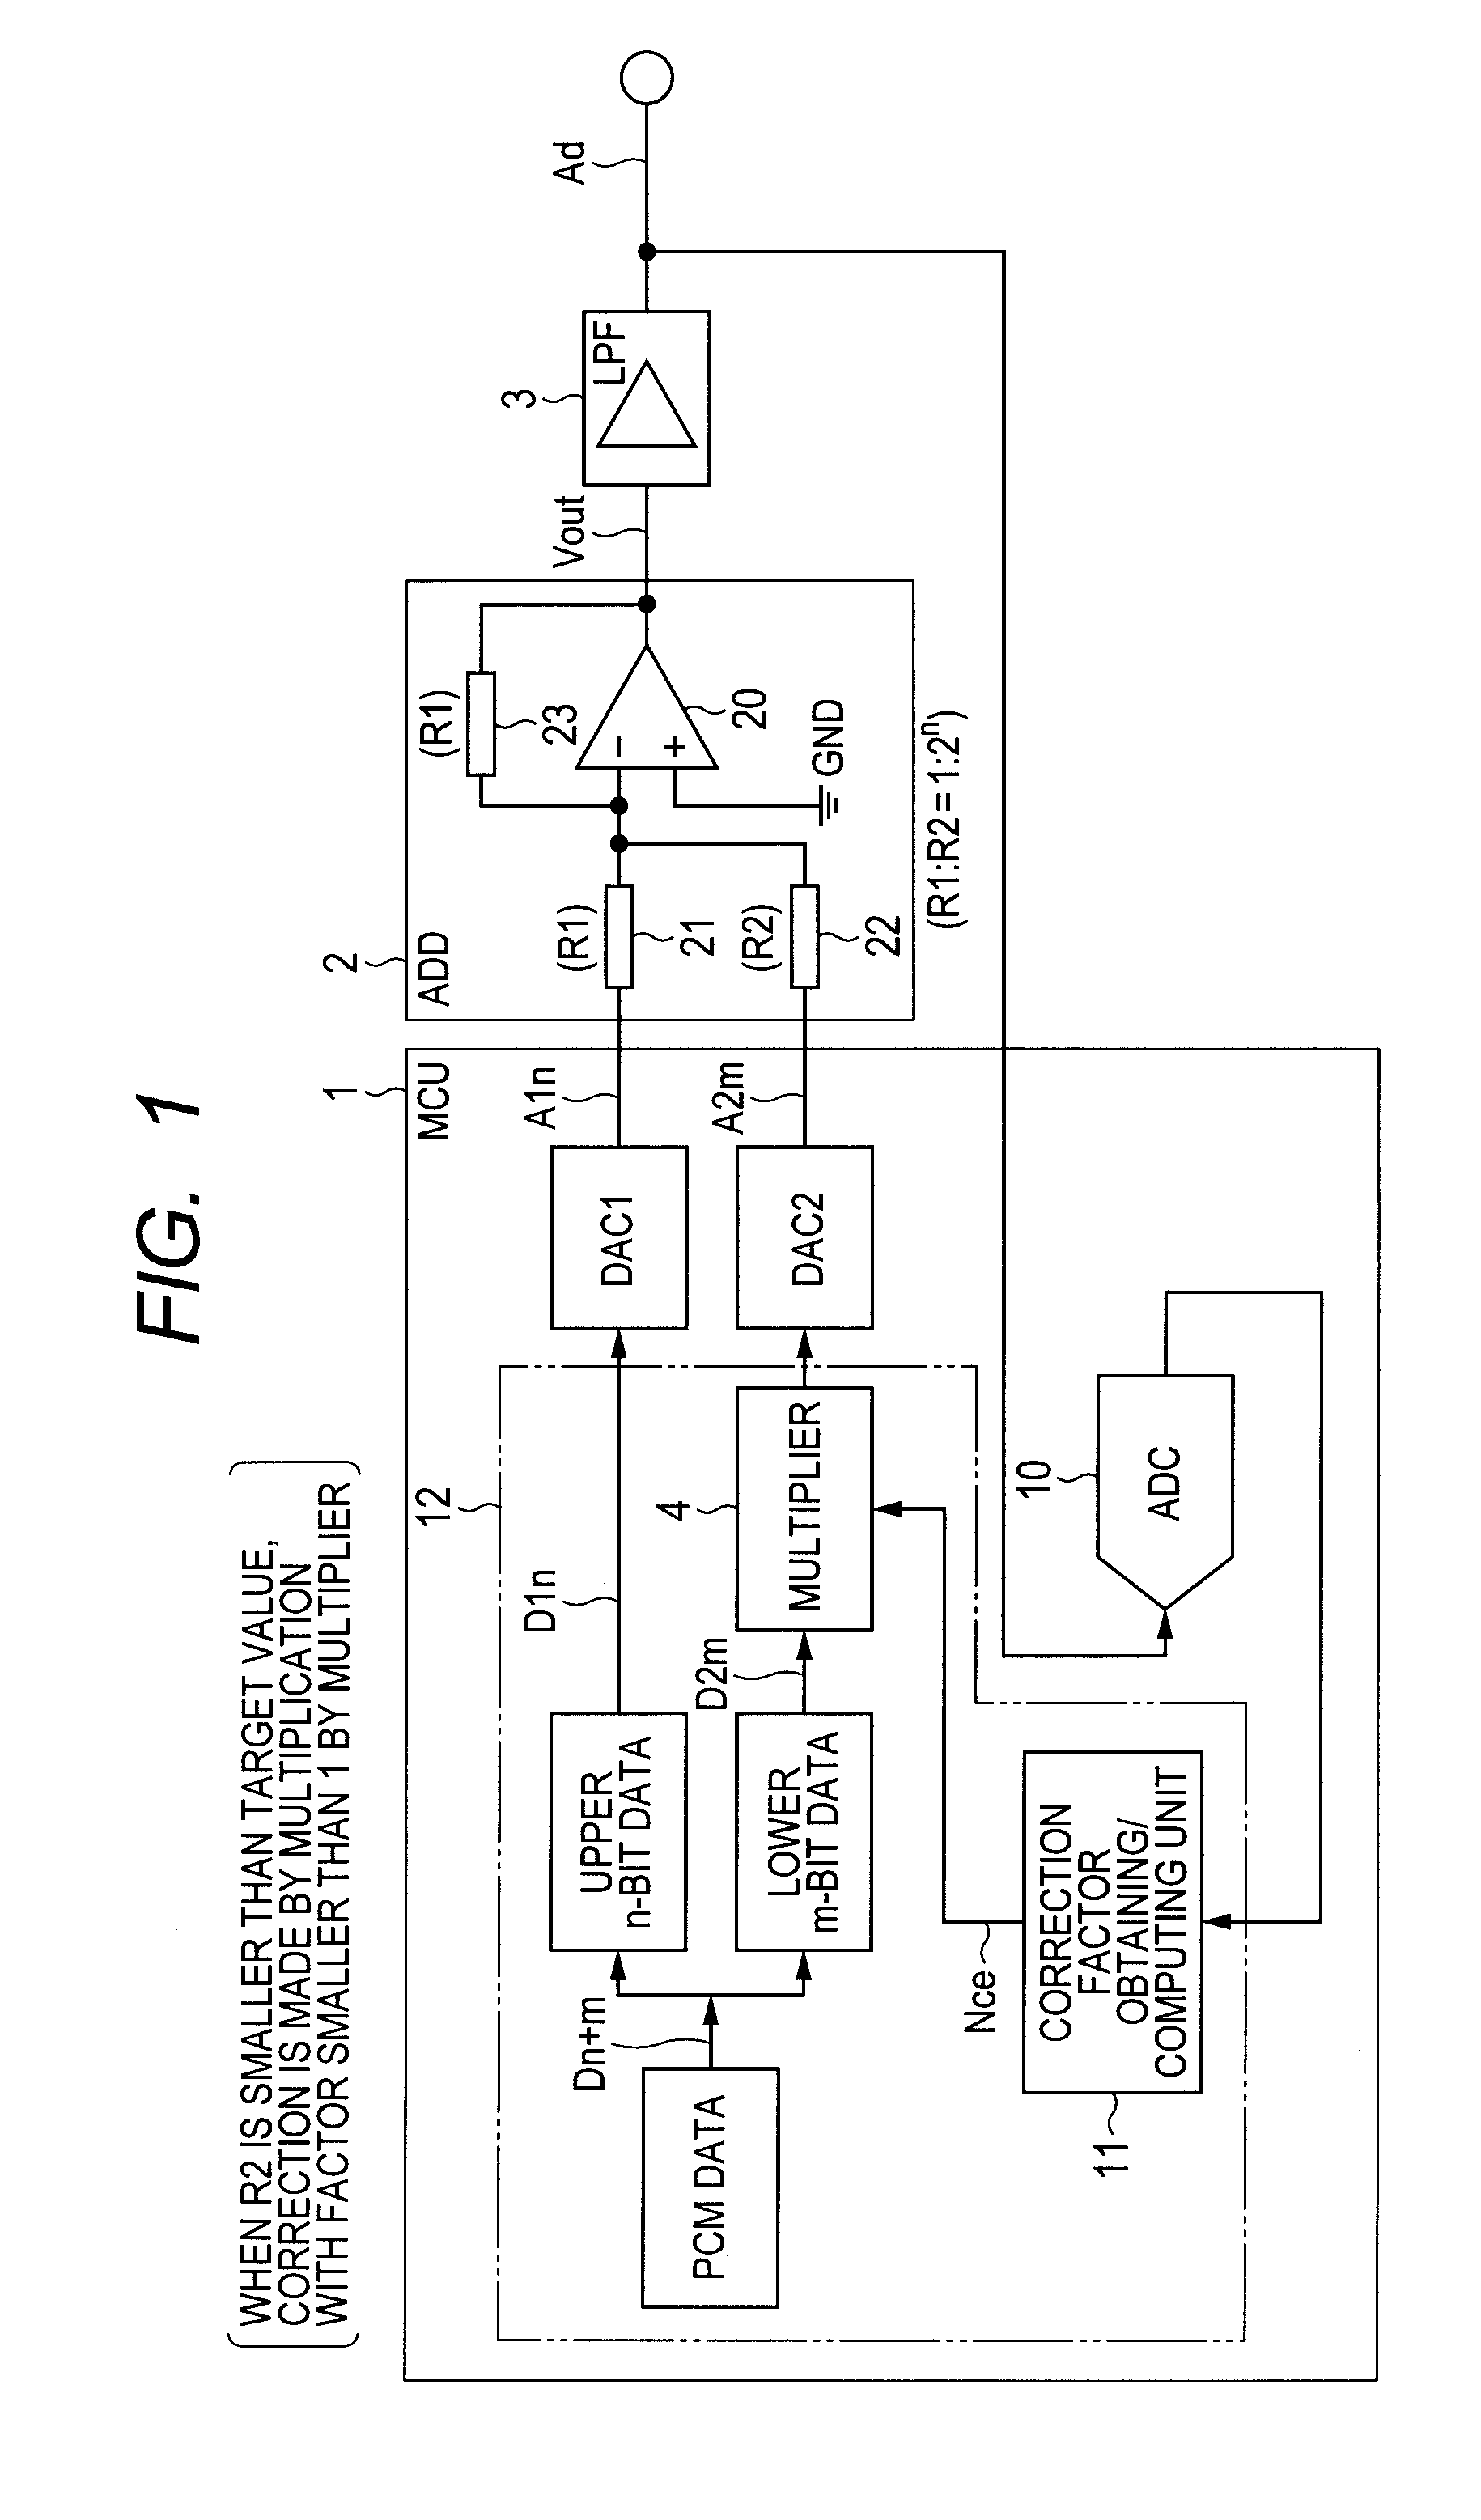 System and Method For Providing High Resolution Digital-To-Analog Conversion Using Low Resolution Digital-To-Analog Converters